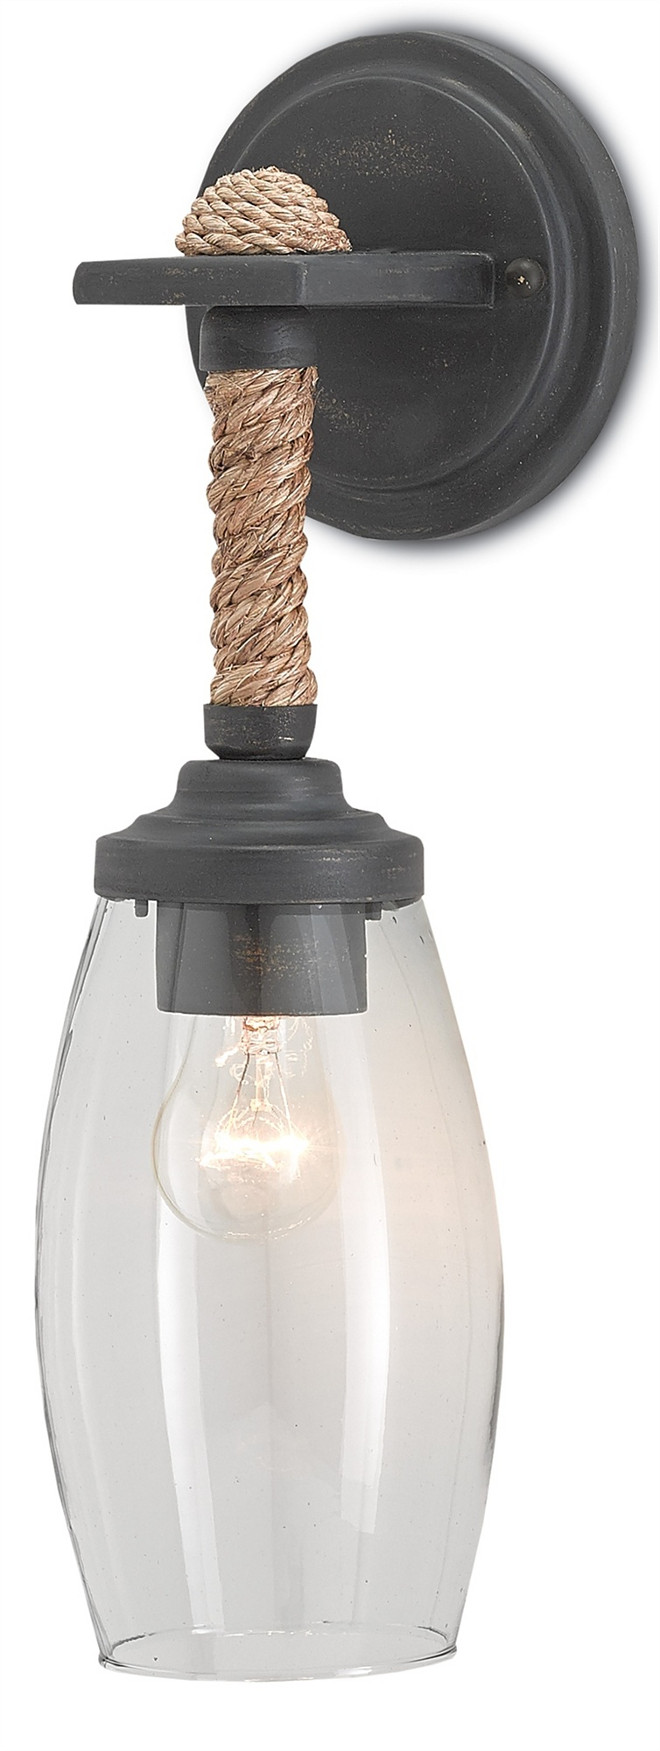 Currey & Co Hightider Wall Sconce. Farmhouse style lighting. Farmhouse interior lovers will love the simplicity of this sconce by Currey and Co. The perfect combination of natural materials and industrial textures, the Hightider Wall Sconce illuminates brilliant light through a blown glass shade. Its wrought iron metal frame is finished in French Black with a rope-wrapped hanging neck. Currey & Co Hightider Wall Sconce